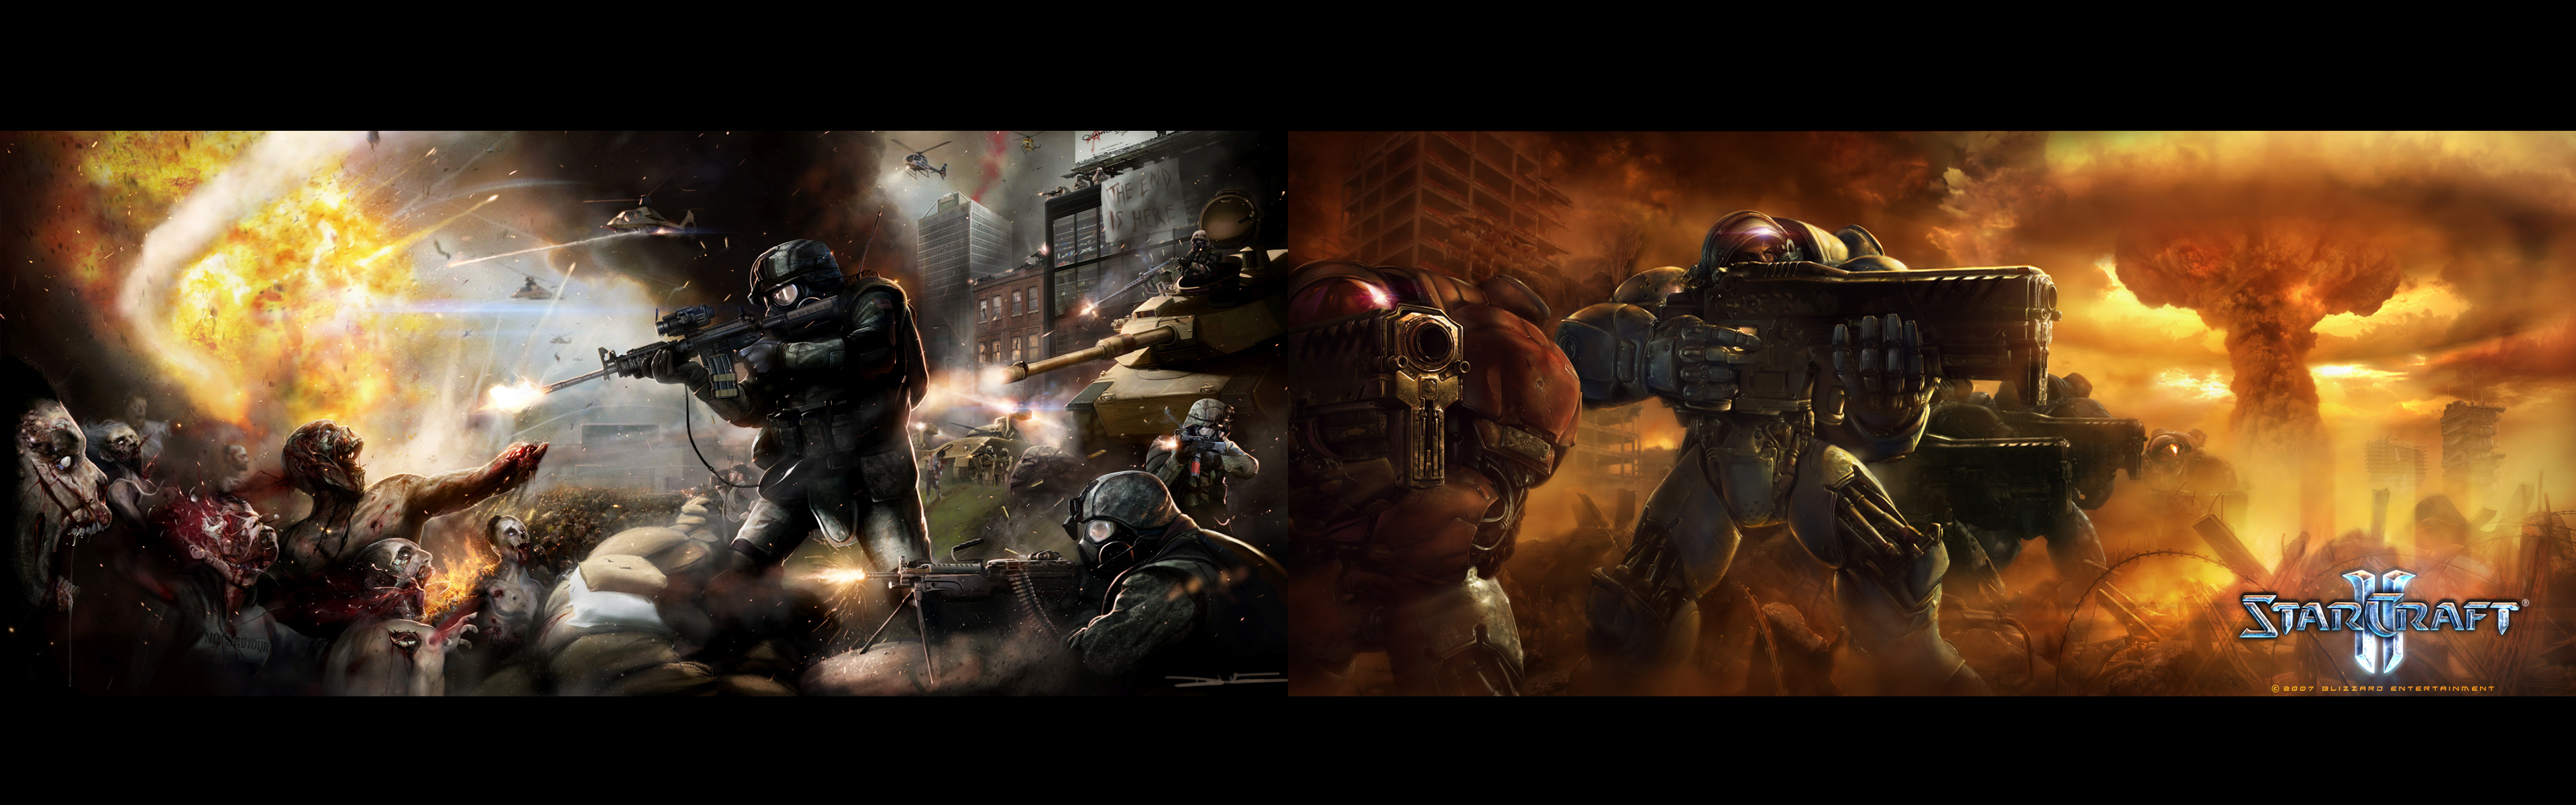 Video game crossover featuring World War Z and Starcraft II